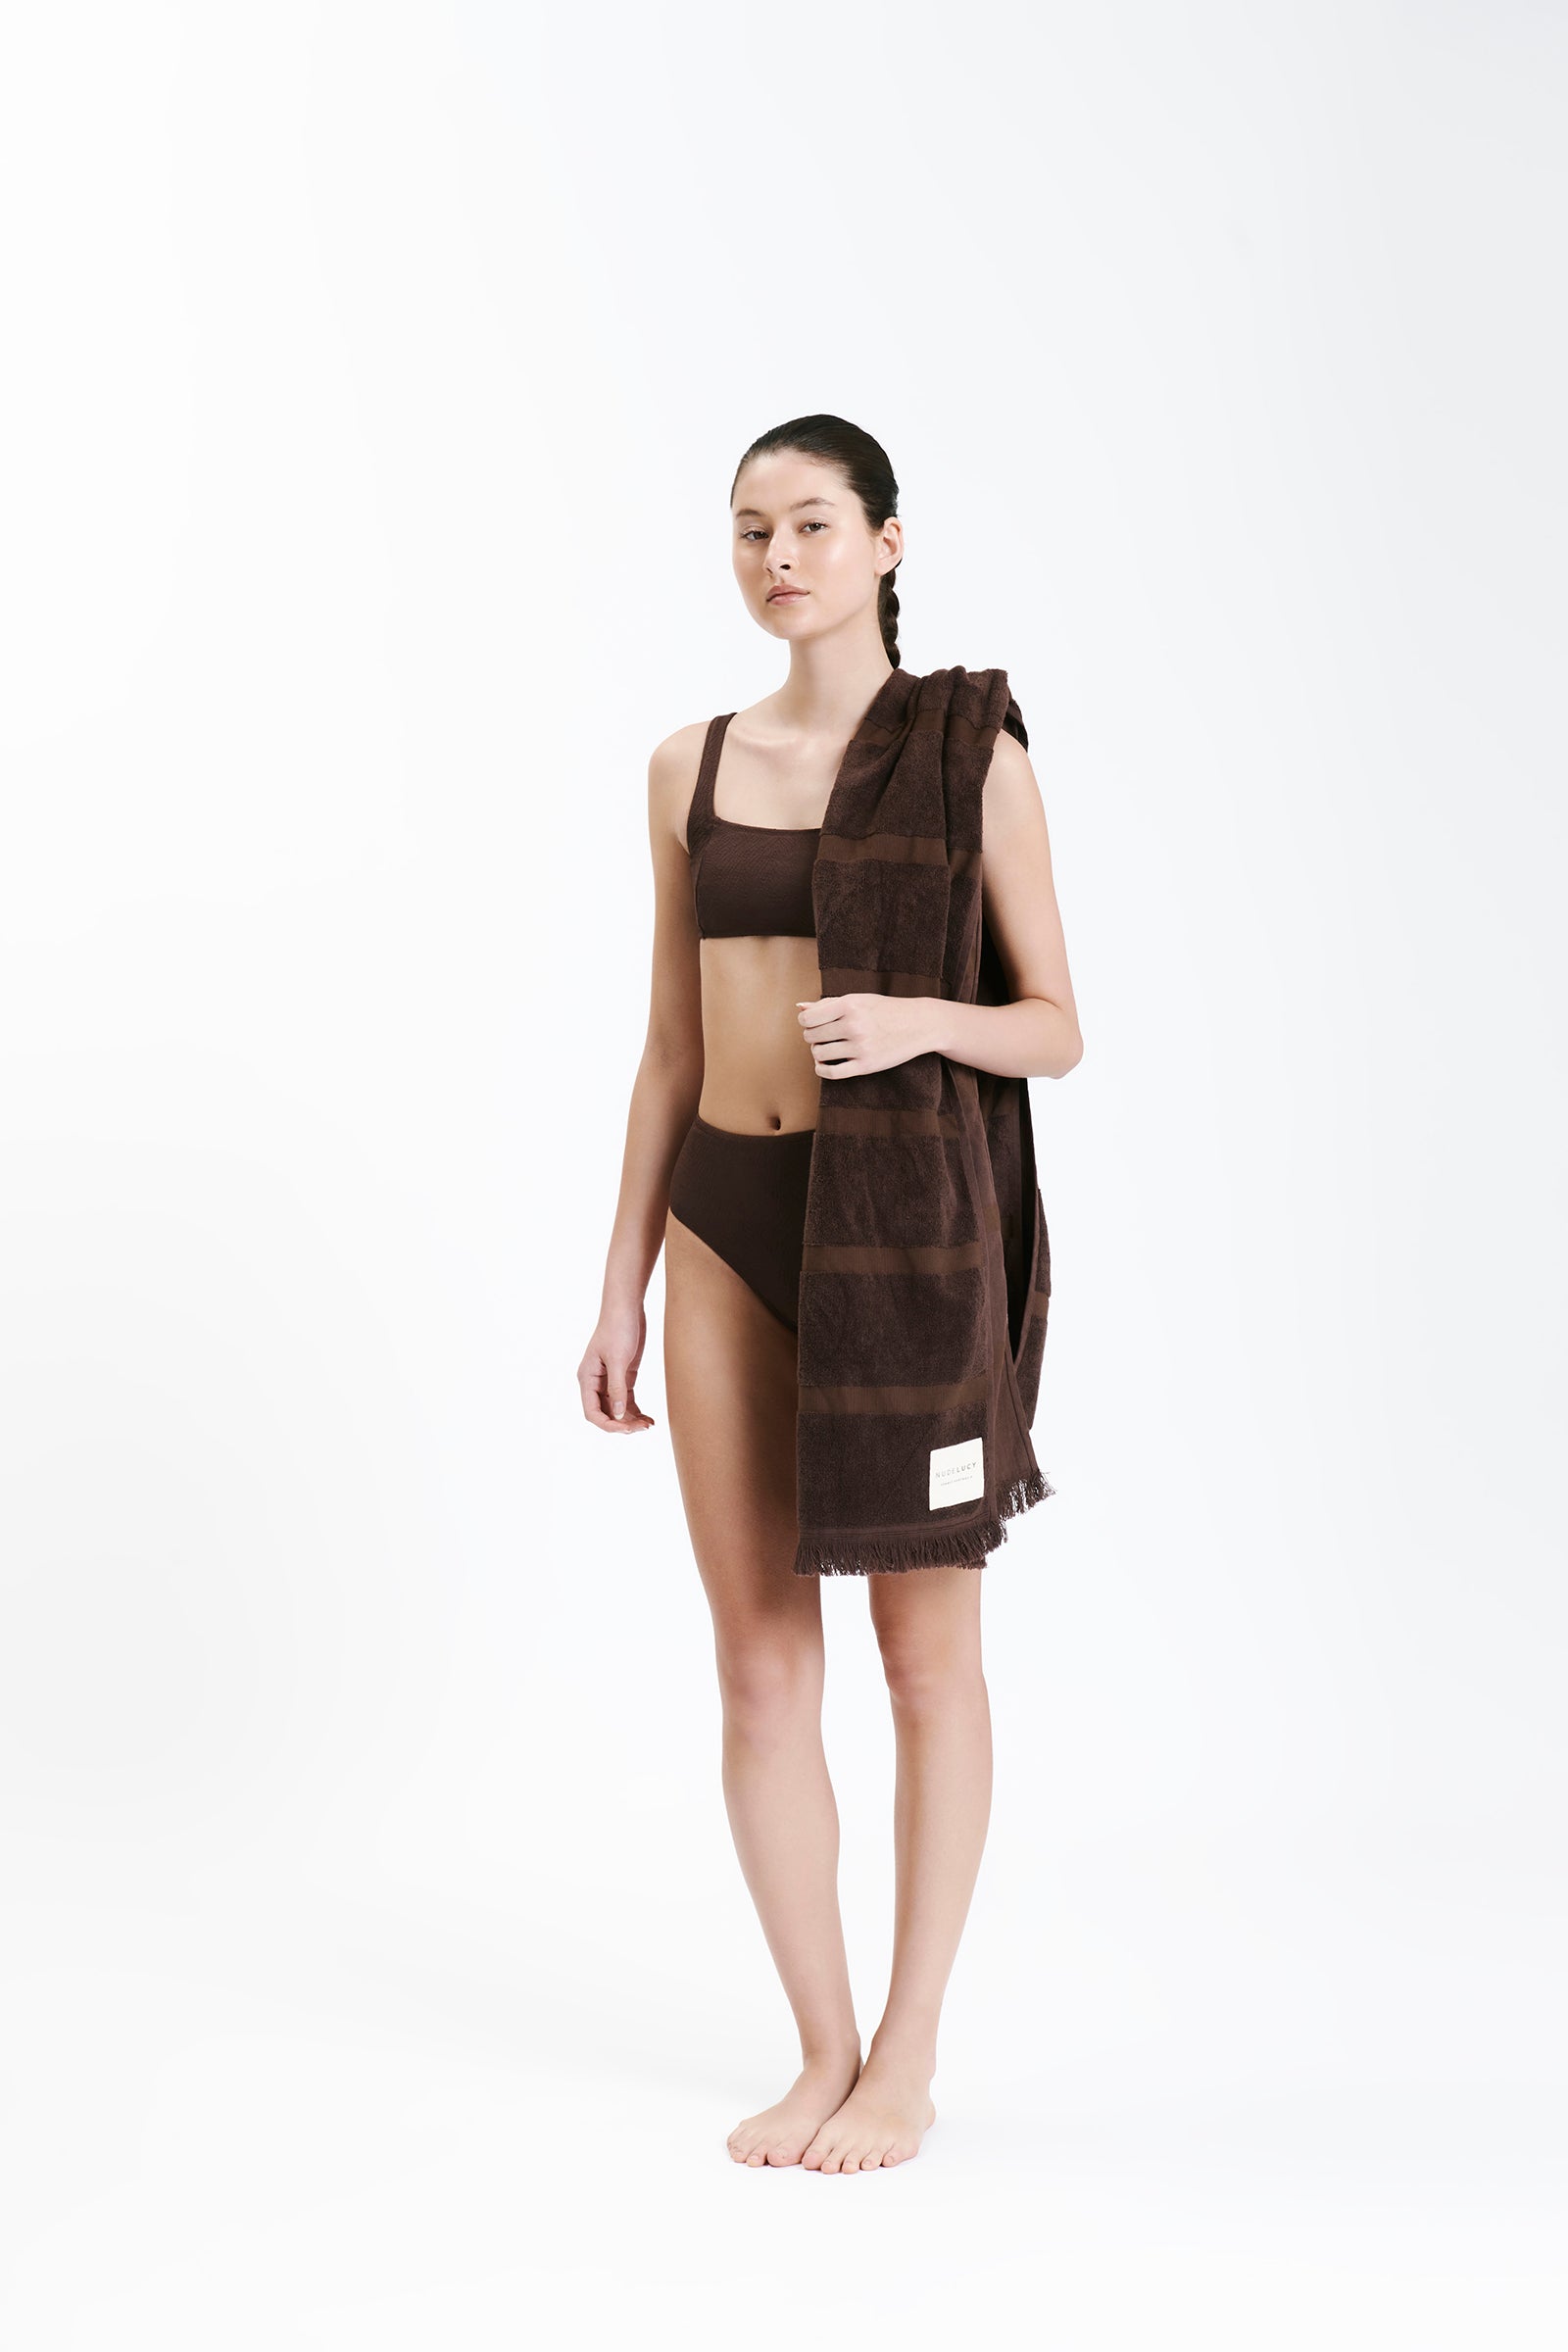 Nude Lucy Nude Classic Beach Towel in a Brown Chocolate Cacao Colour